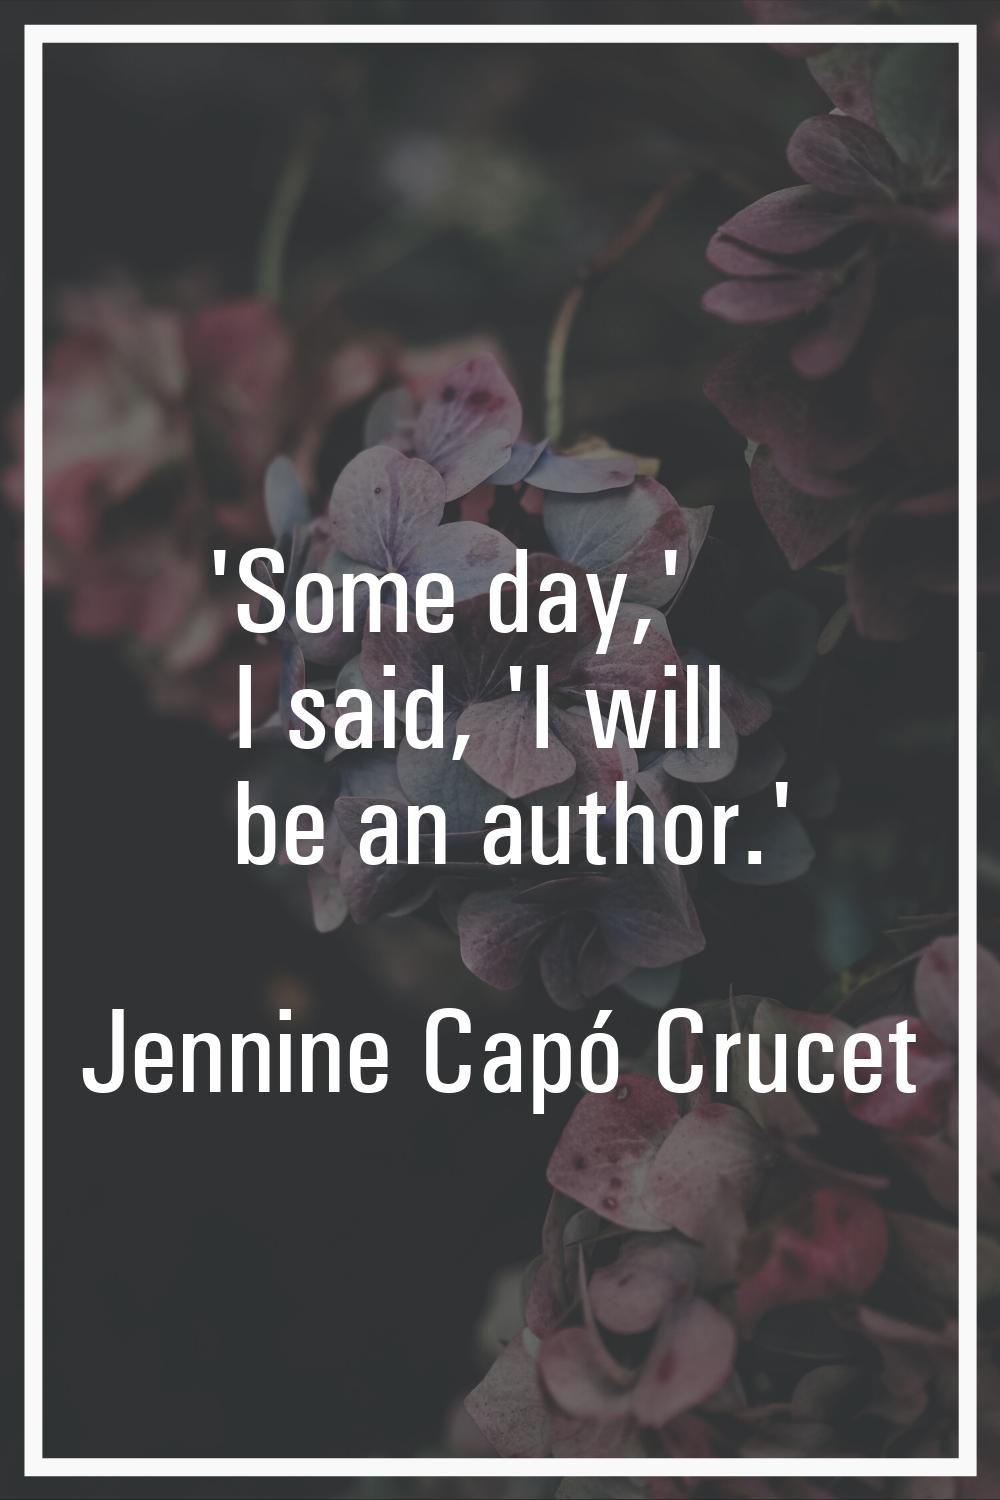 'Some day,' I said, 'I will be an author.'